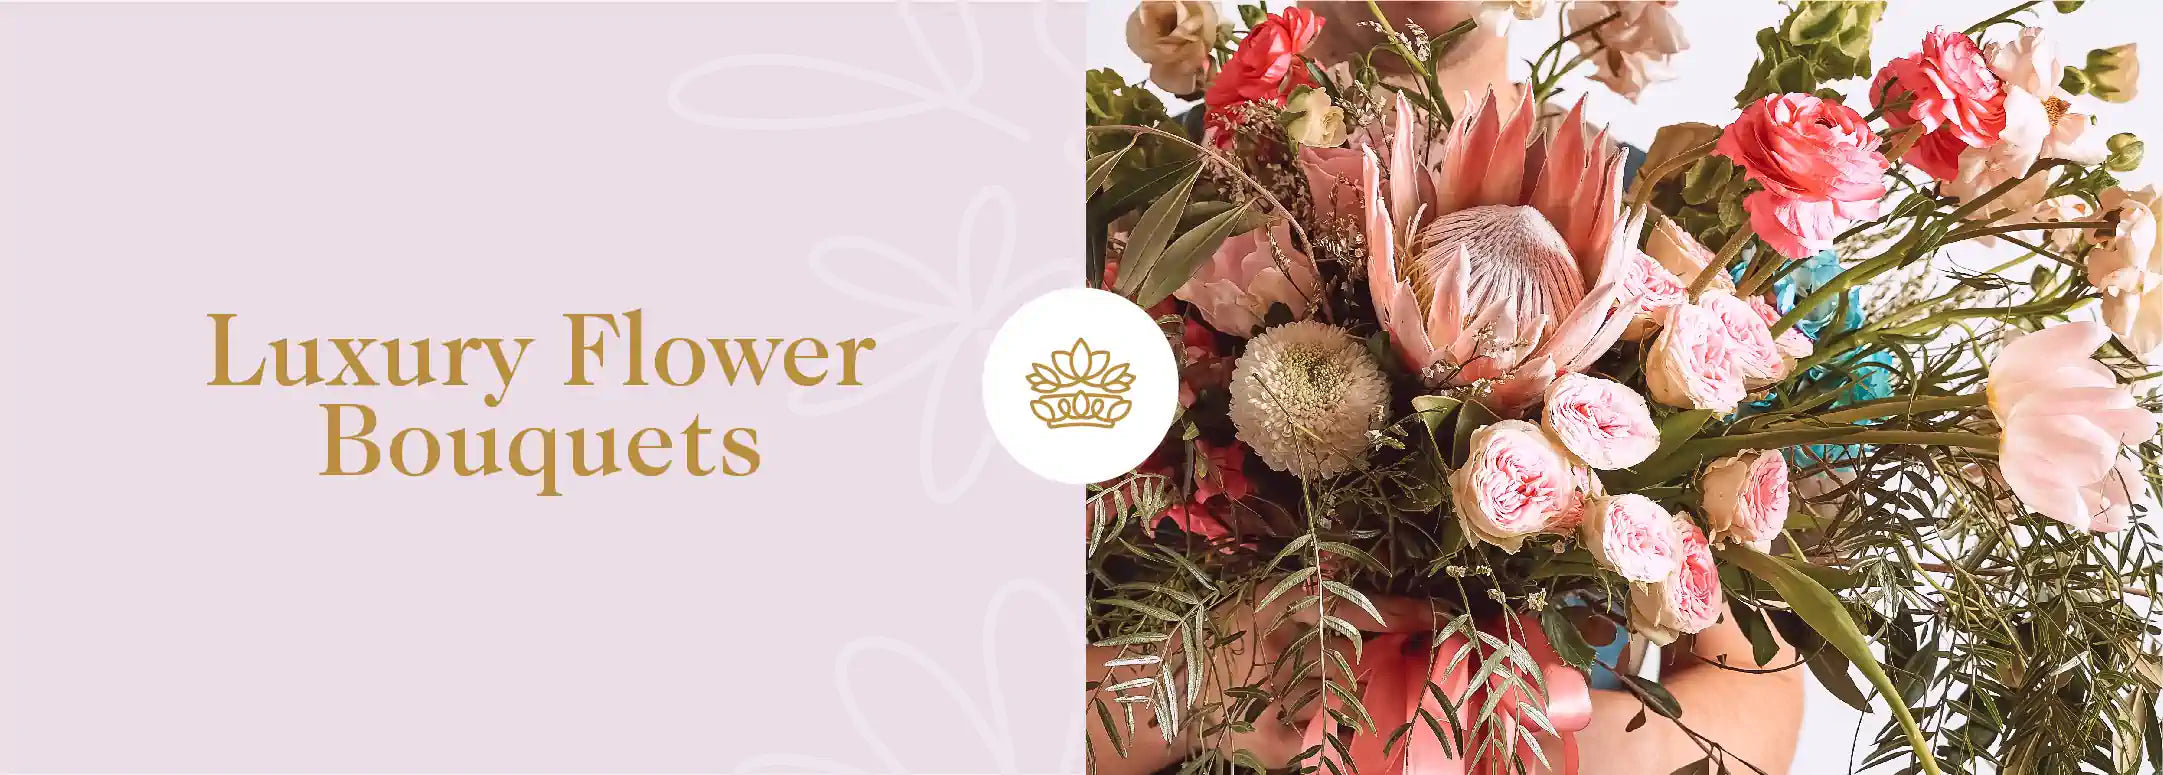 An elaborate flower bouquet held by a male florist, epitomising 'Luxury Flower Bouquets'. Fabulous Flowers and Gifts - Luxury Flower Arrangements